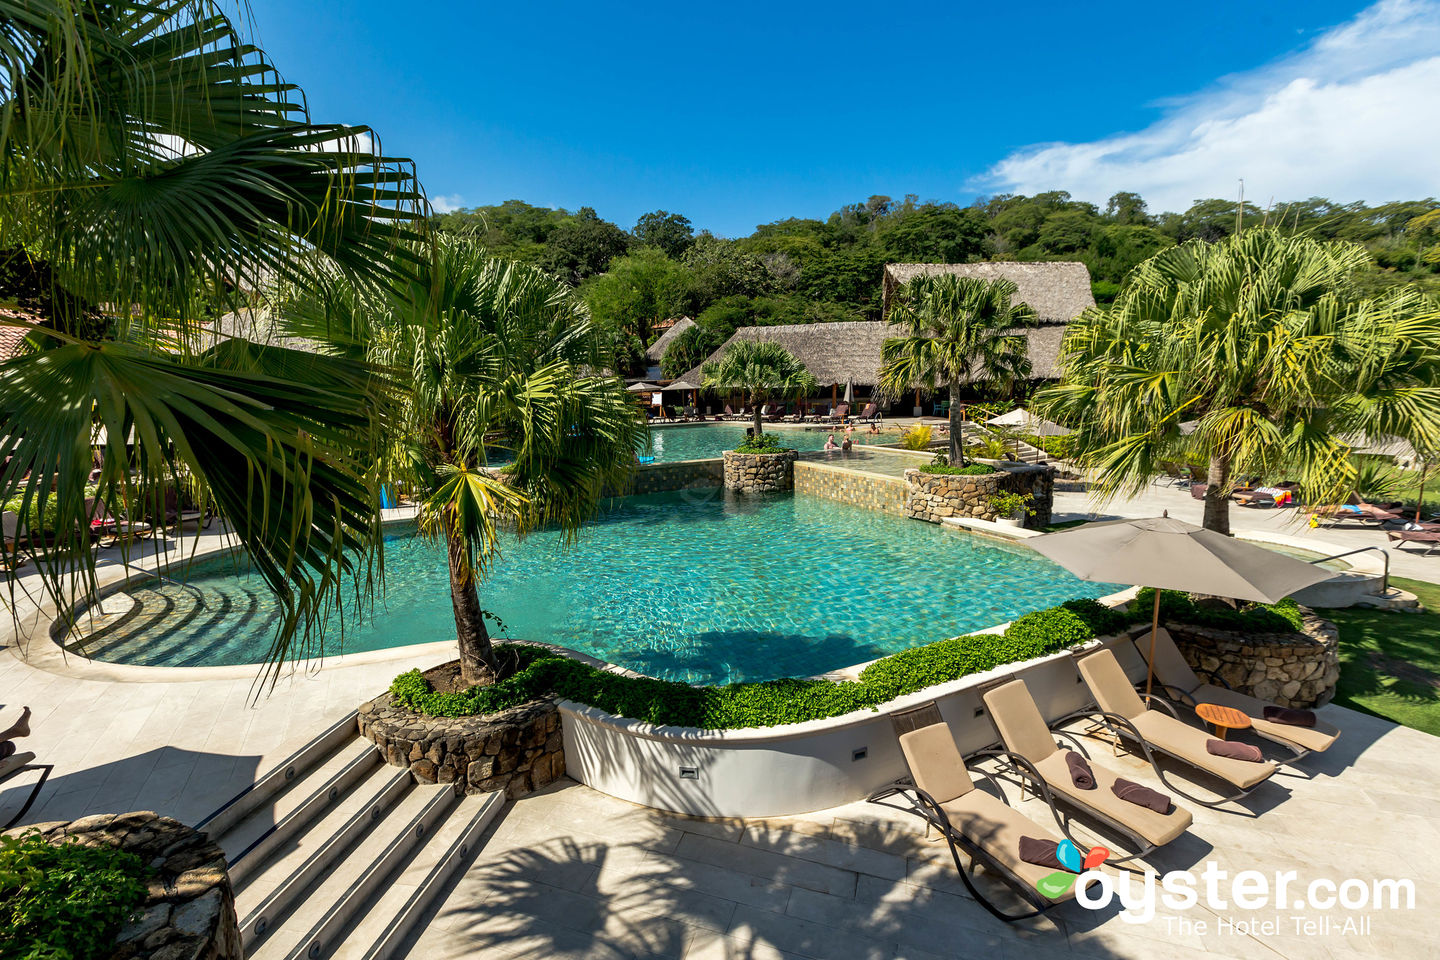 Secrets Papagayo Costa Rica Review What To REALLY Expect If You Stay